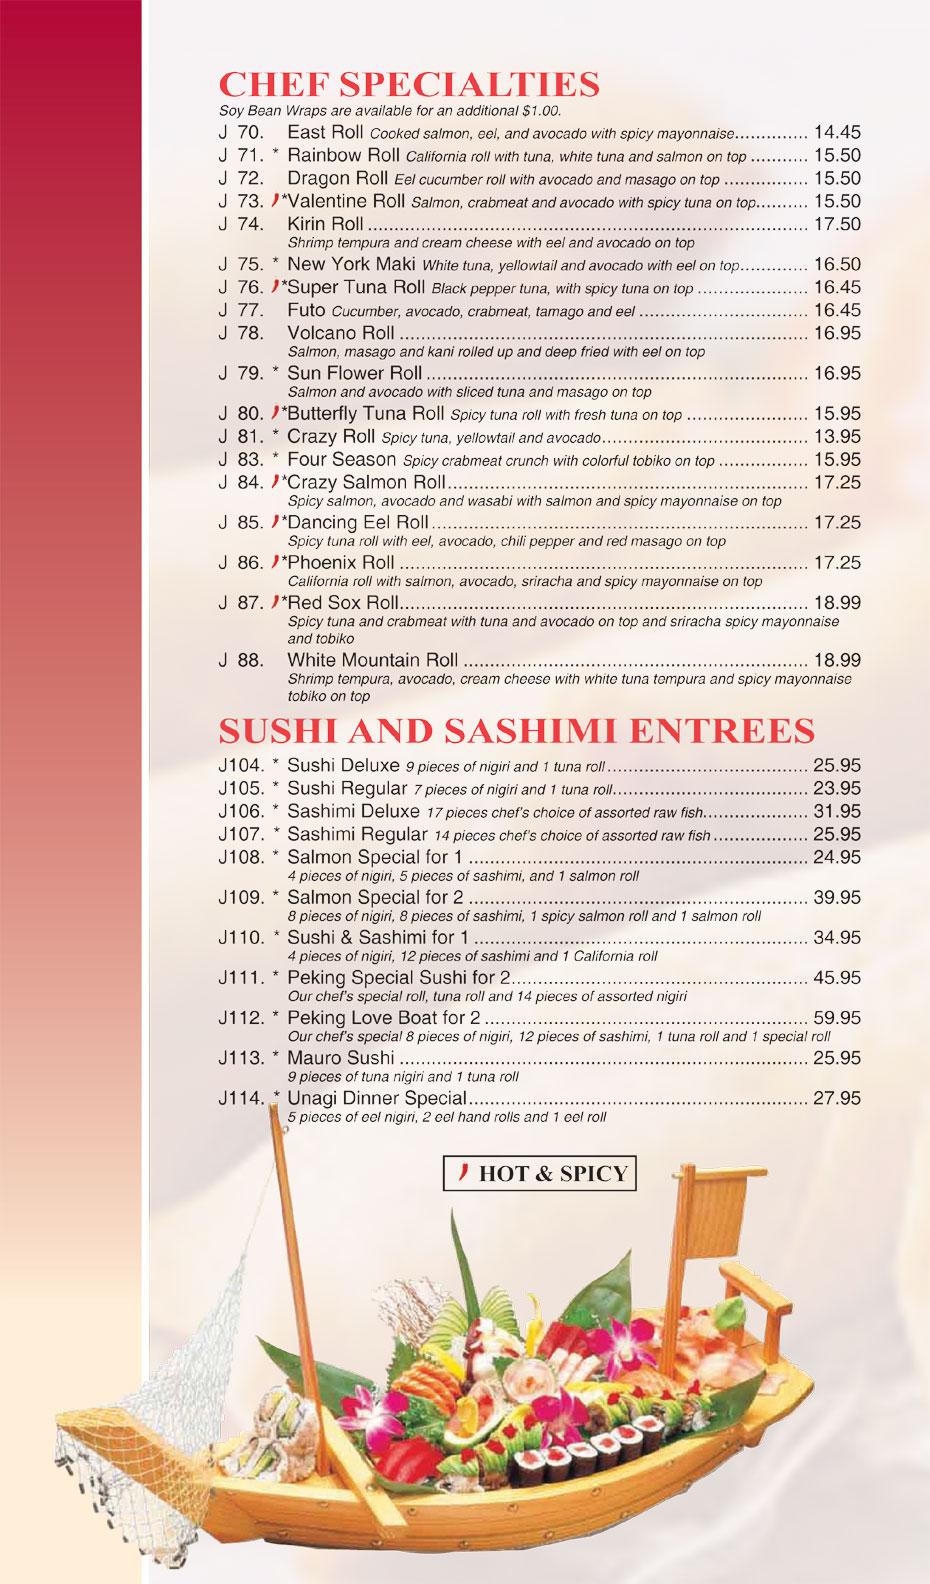 Chef's Specialties - Sushi And Sashimi Entrees